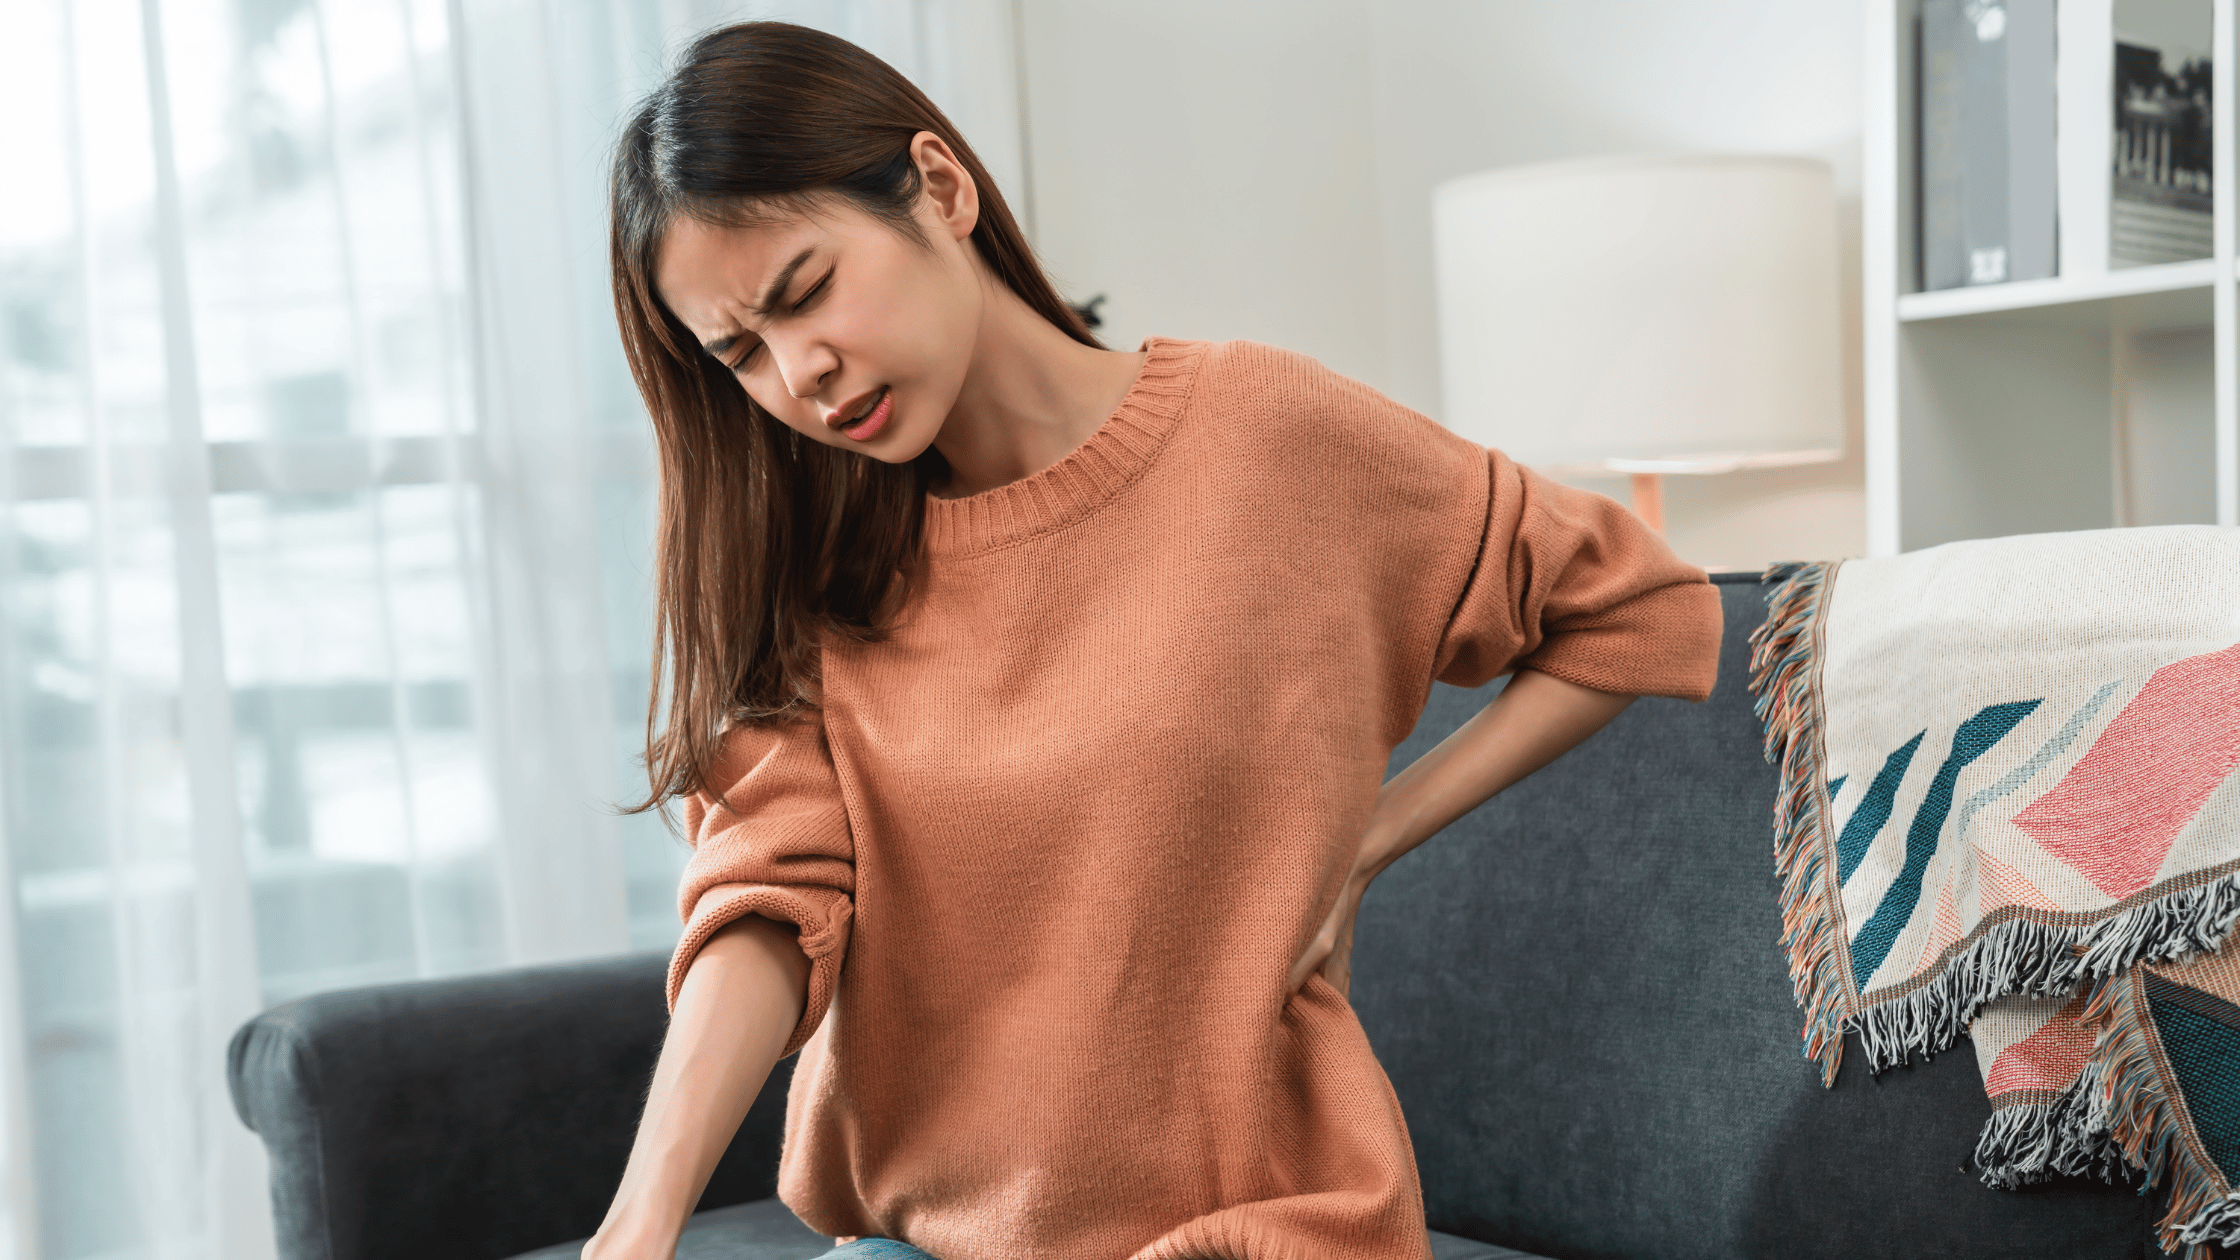 Physical Therapy Help With Chronic Pain Relief in Michigan?